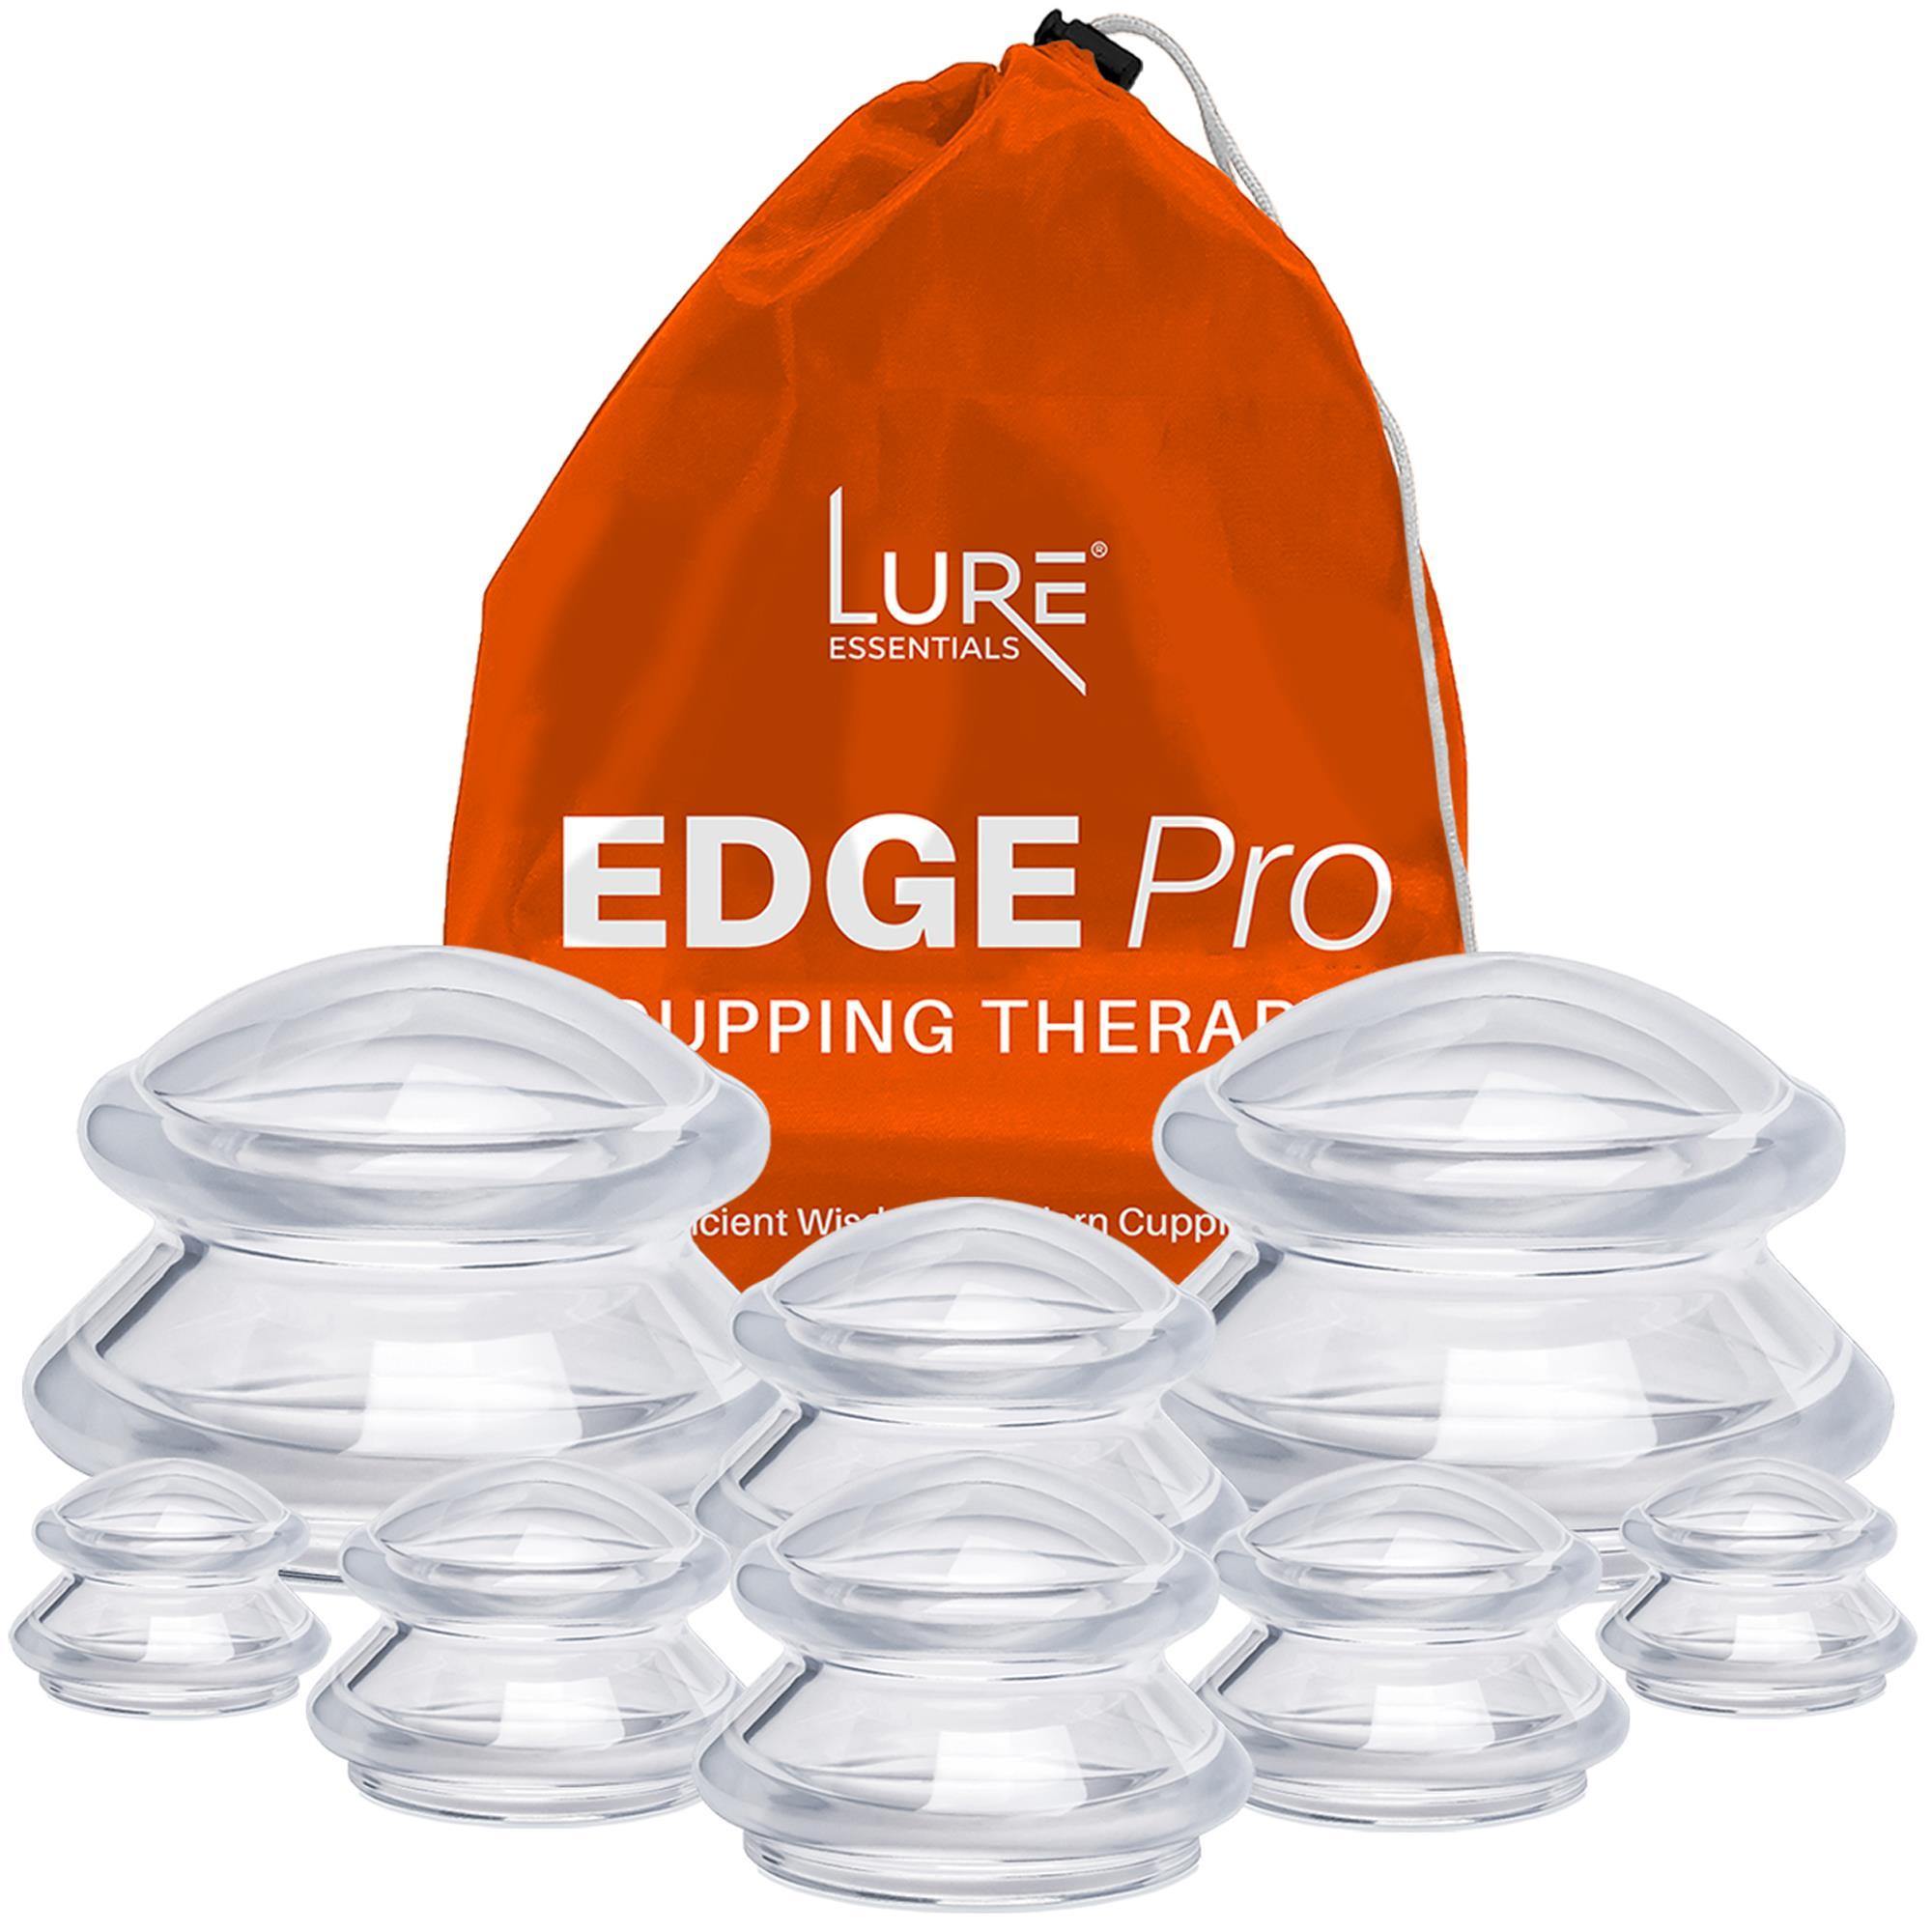 EDGE™ Pro Cupping Set Clear, 8 Cups - Lure Essentials